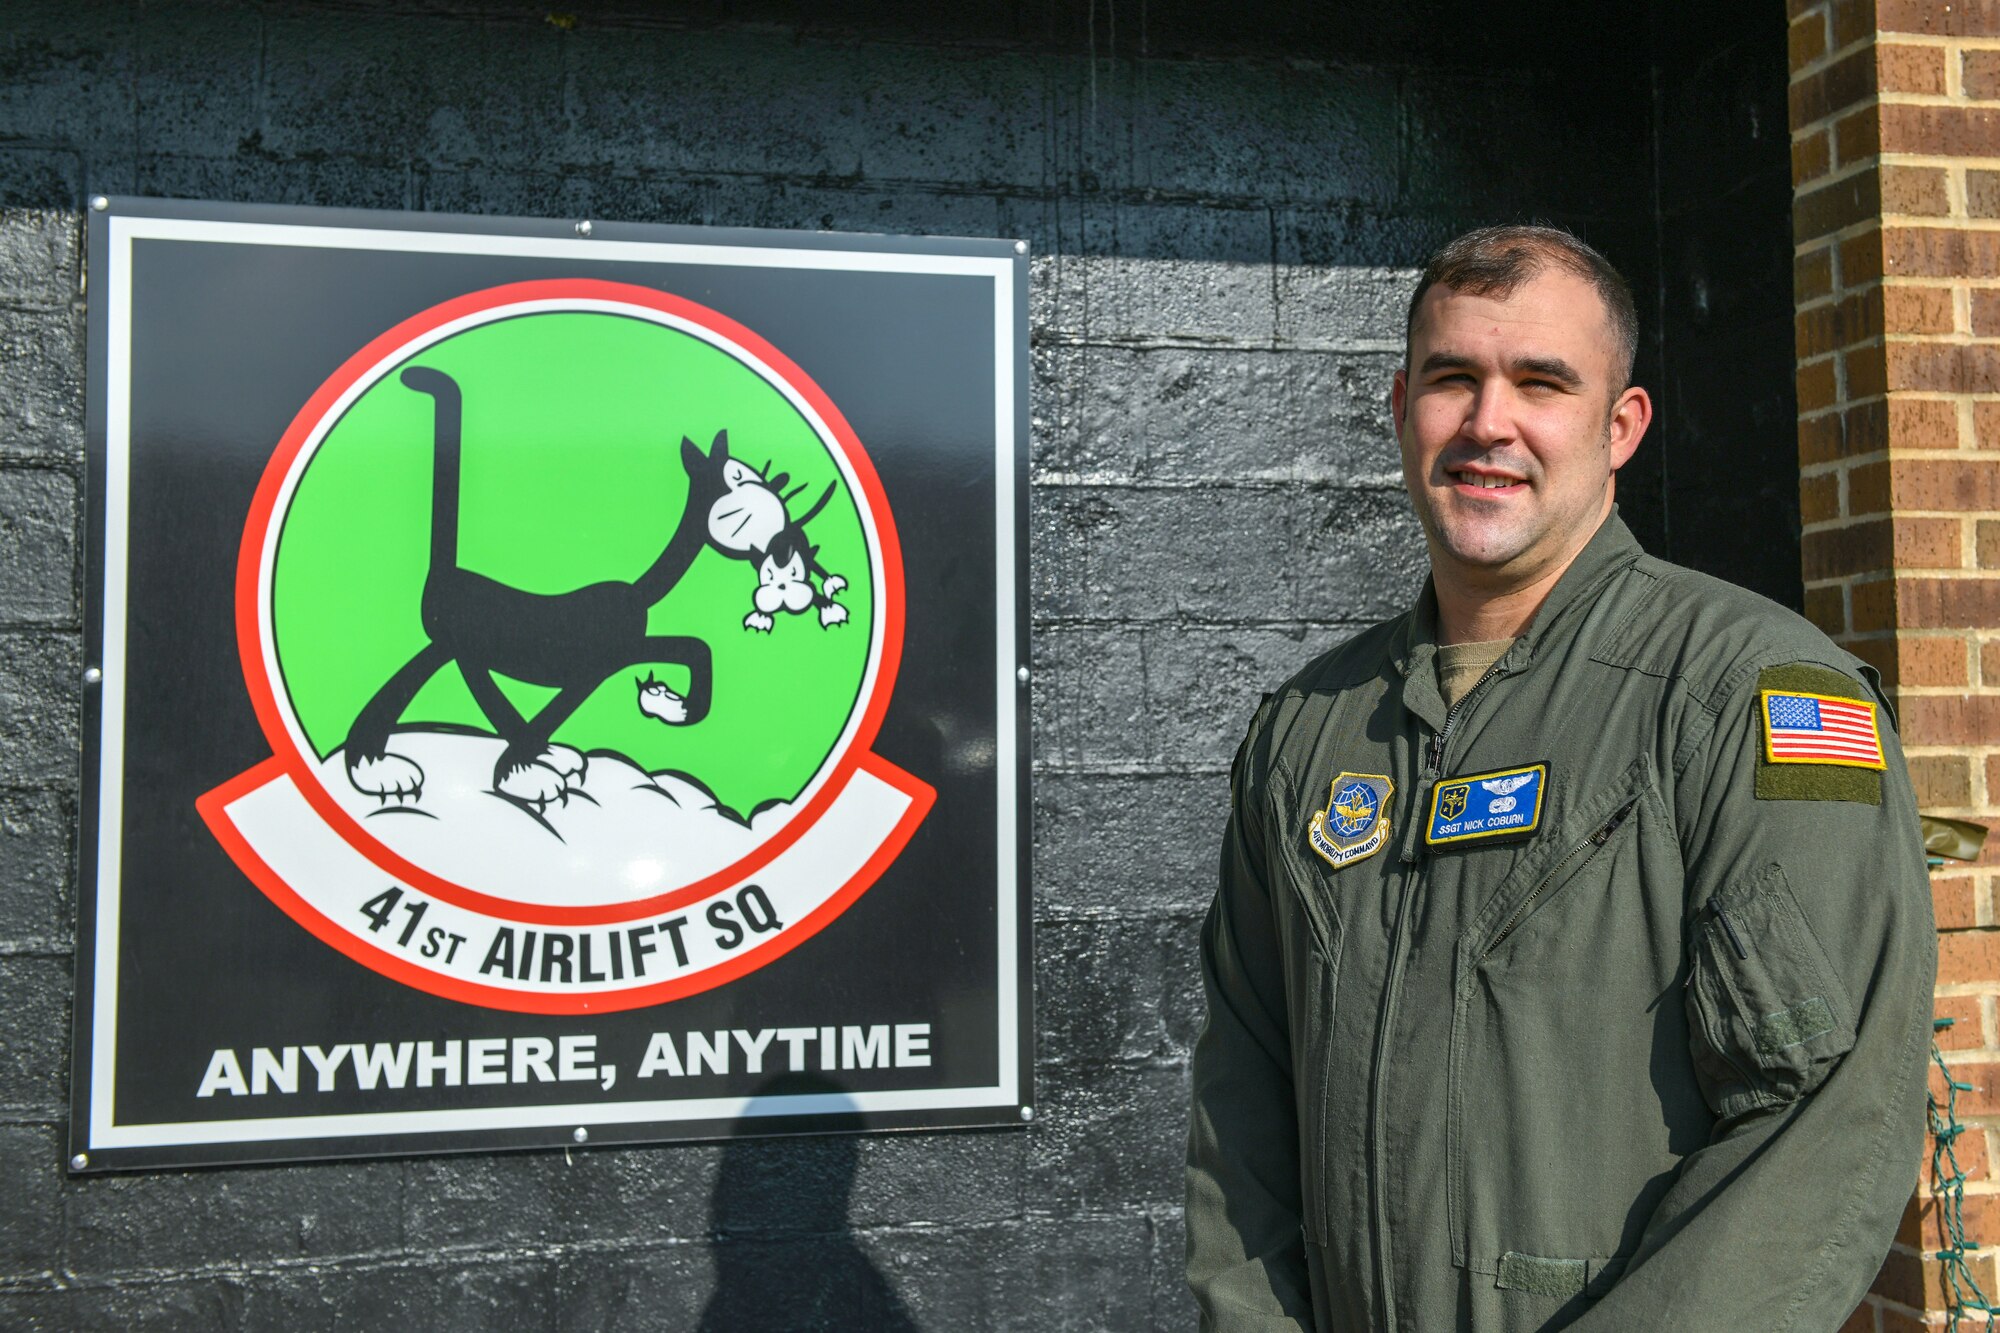 A man stands in uniform in front of a sign.